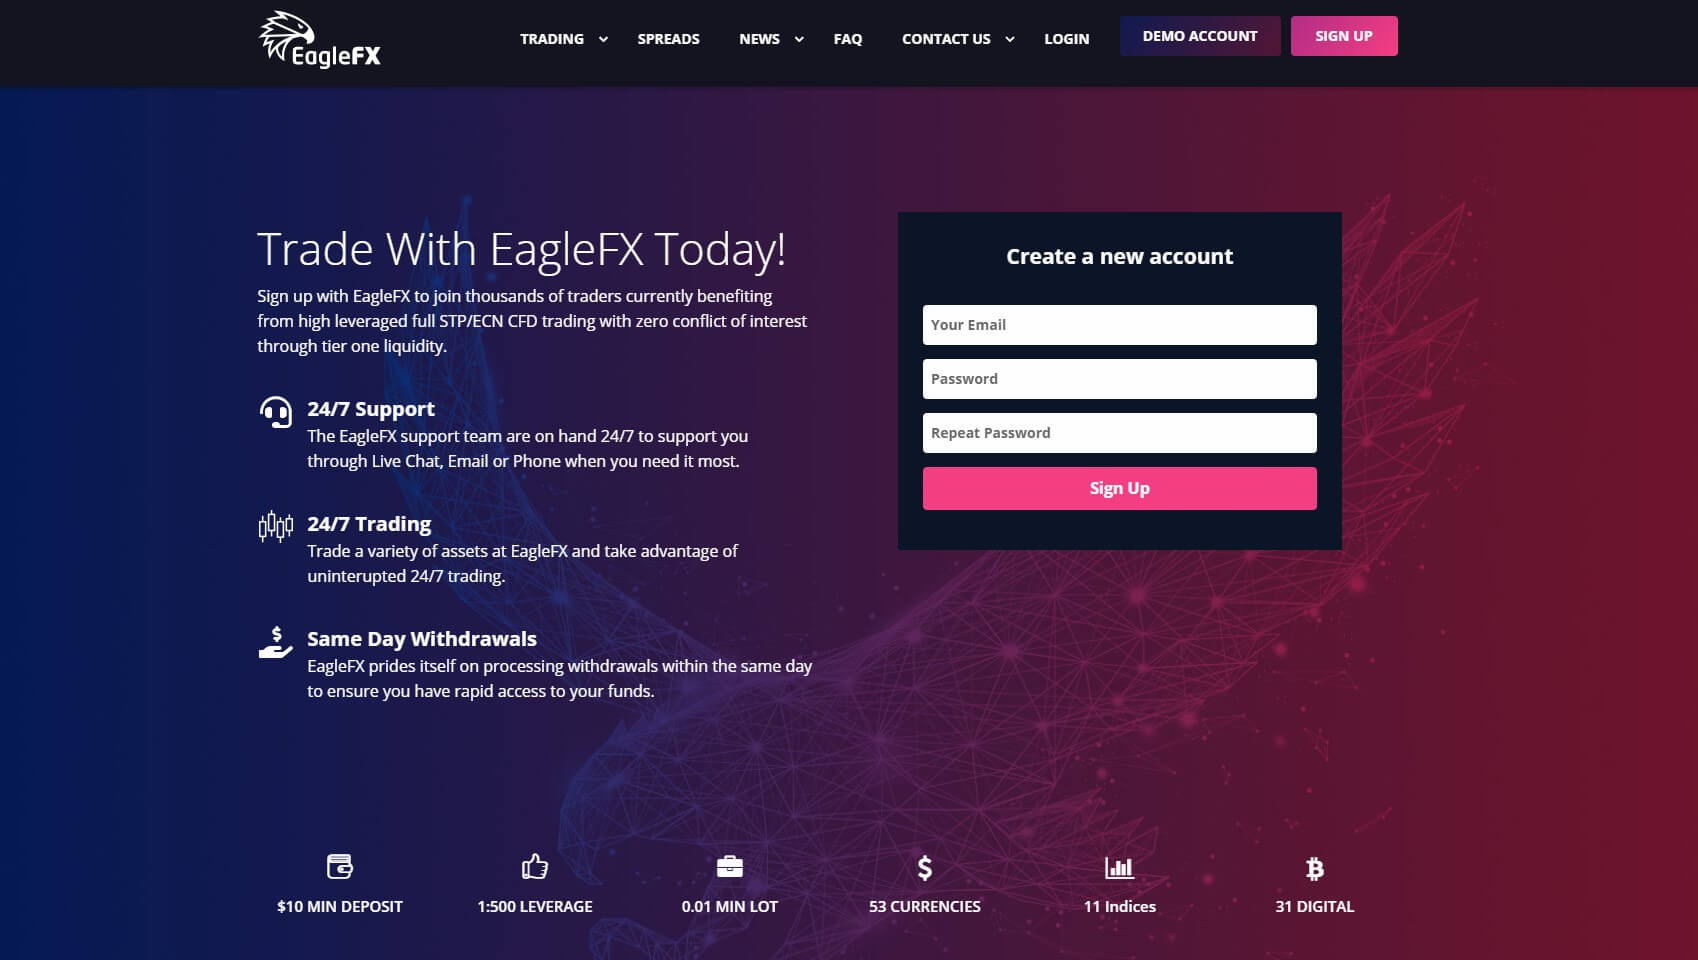 Everything About The EagleFX Review in Trading